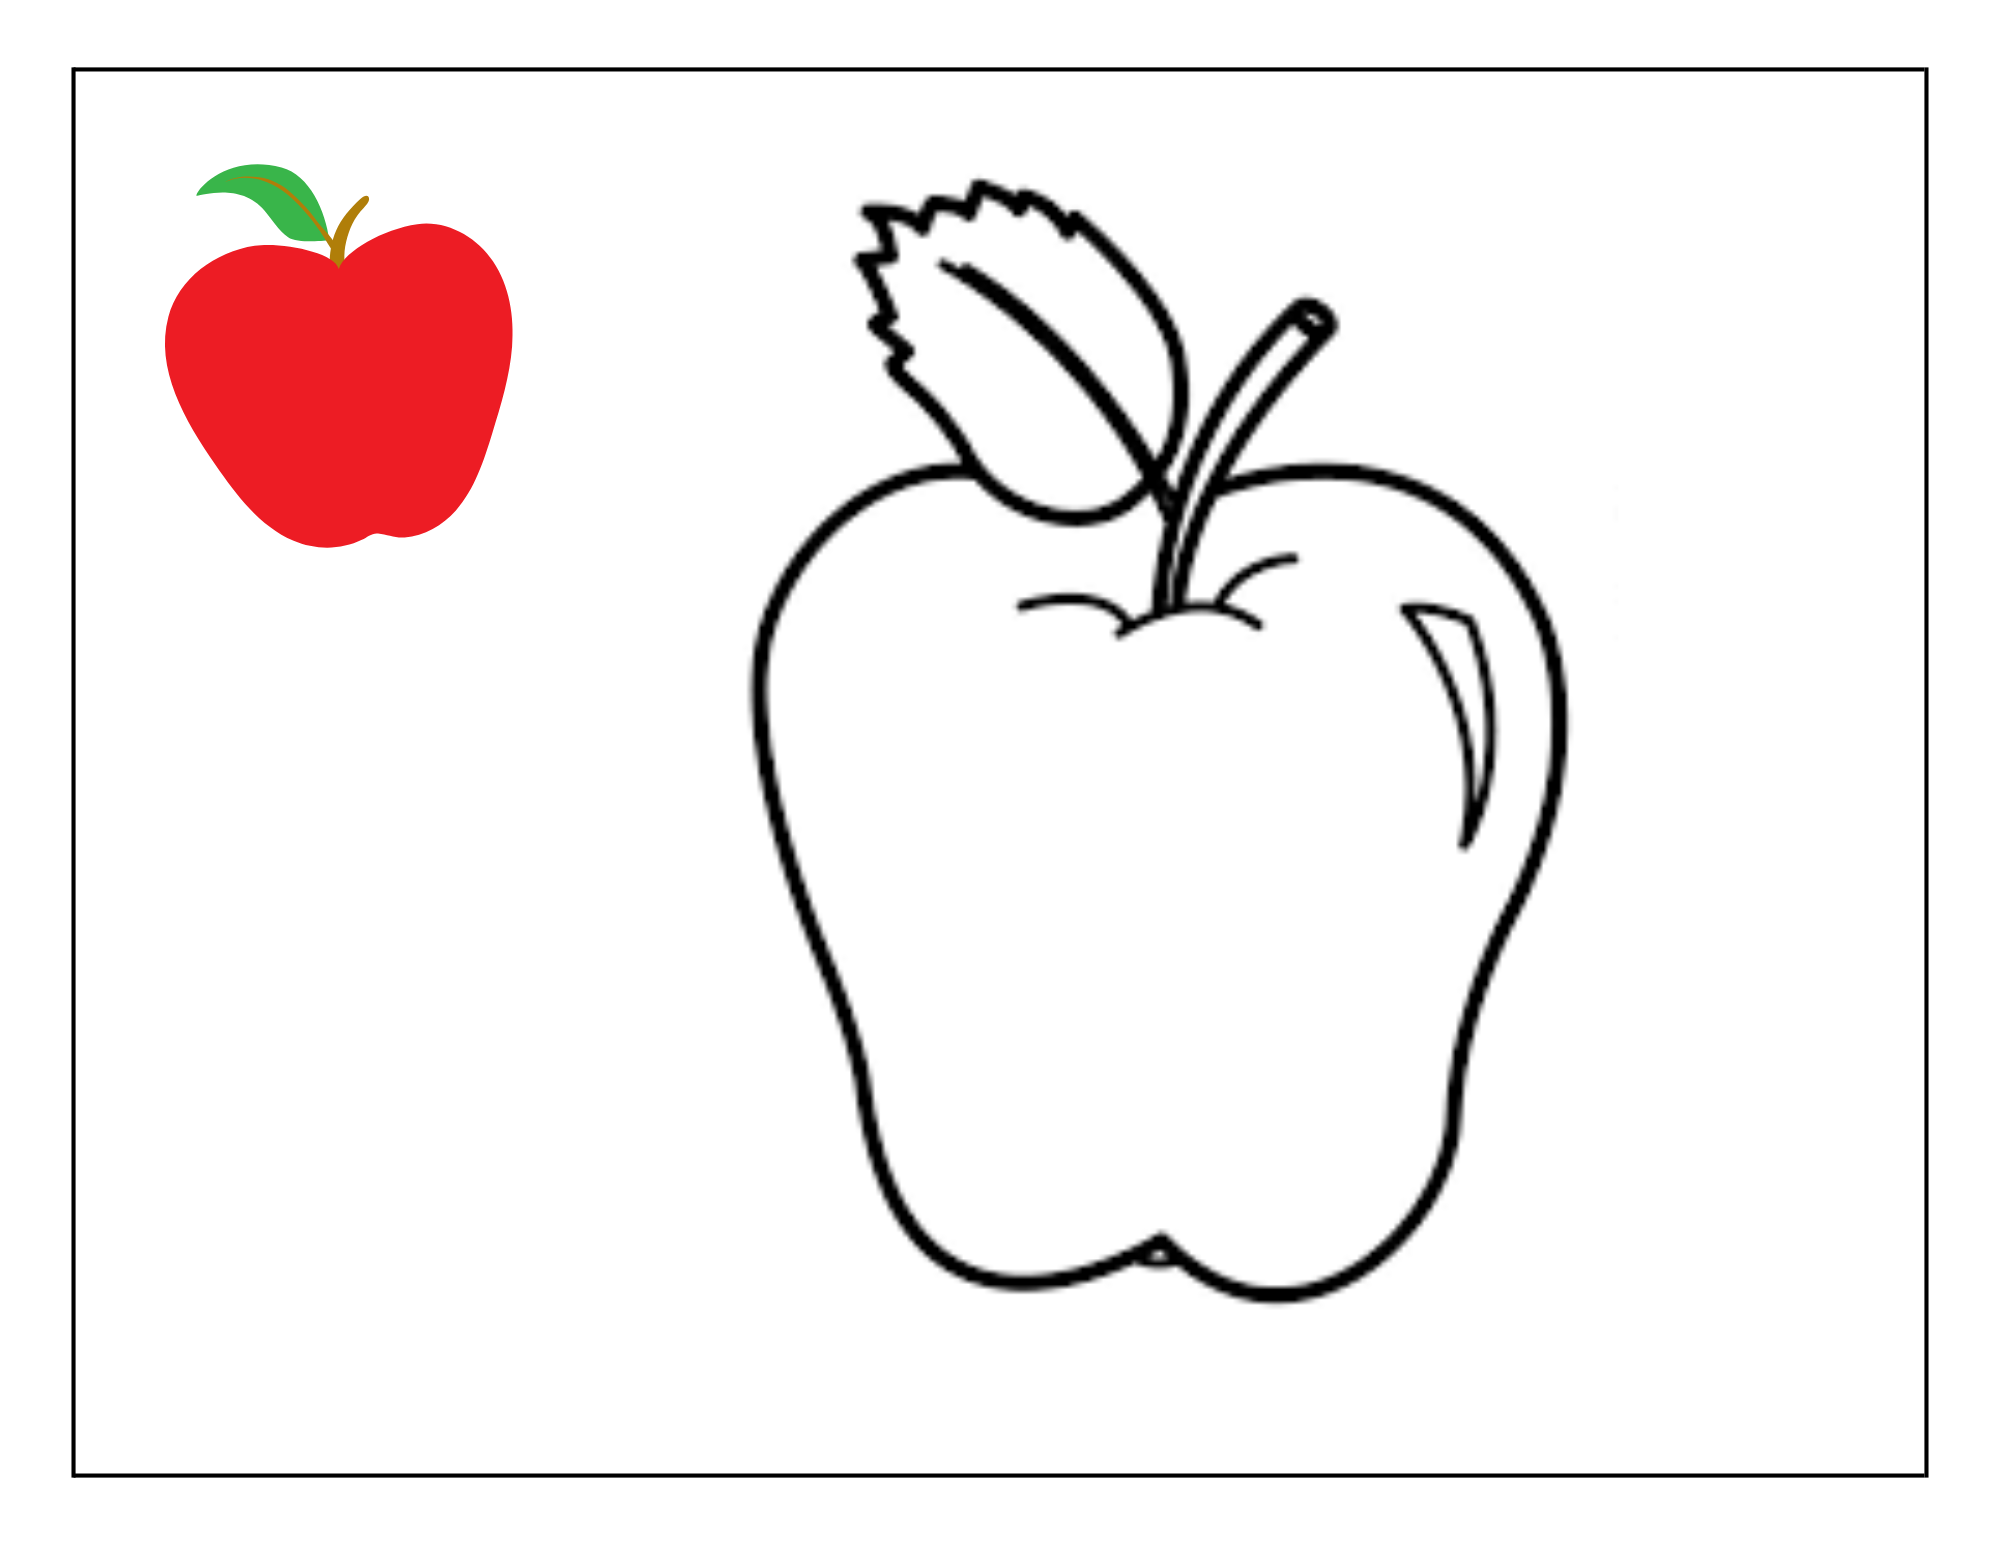 Fruit coloring pages for toddlers - Apple